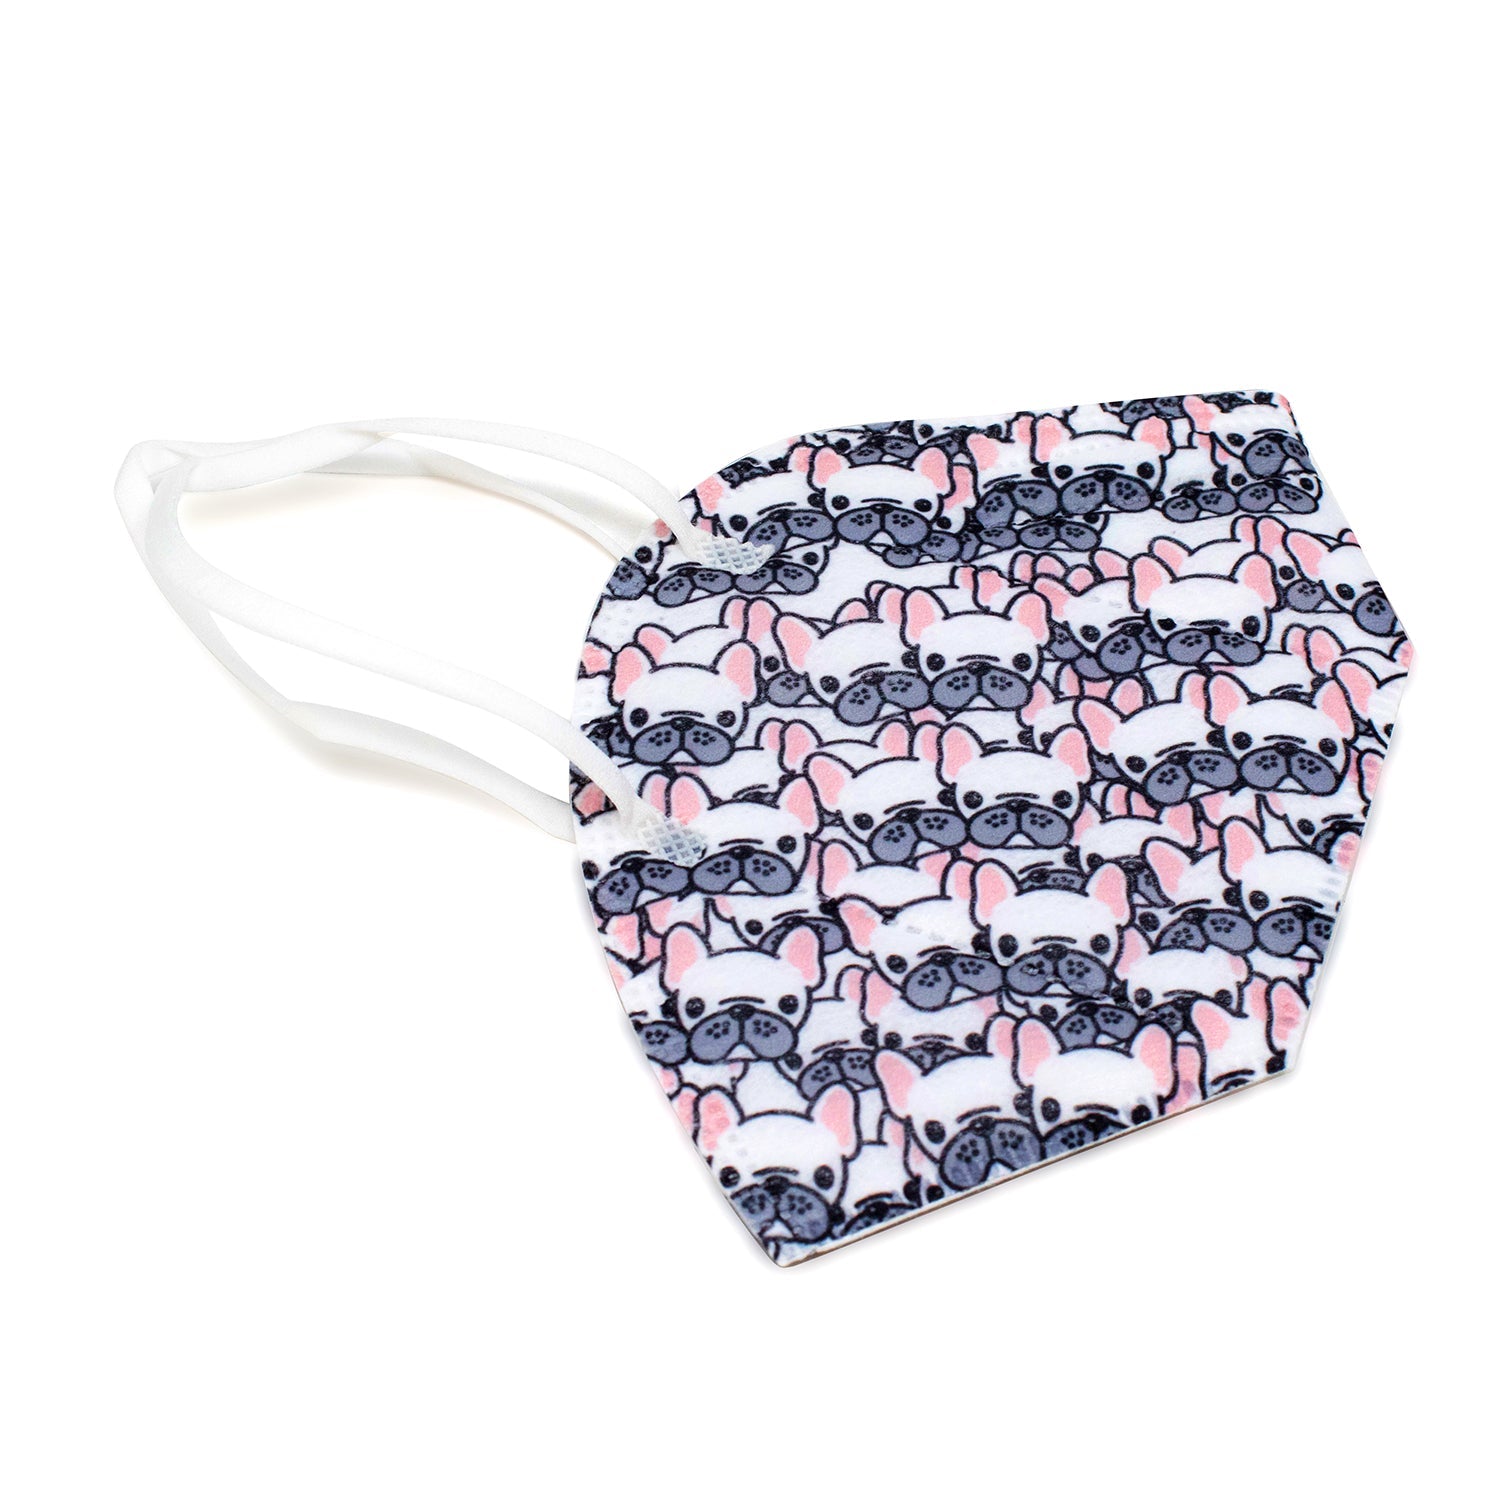 Safe KN95 mask with French Bulldog design with white stripes. Reusable mask, strong elastic straps. 